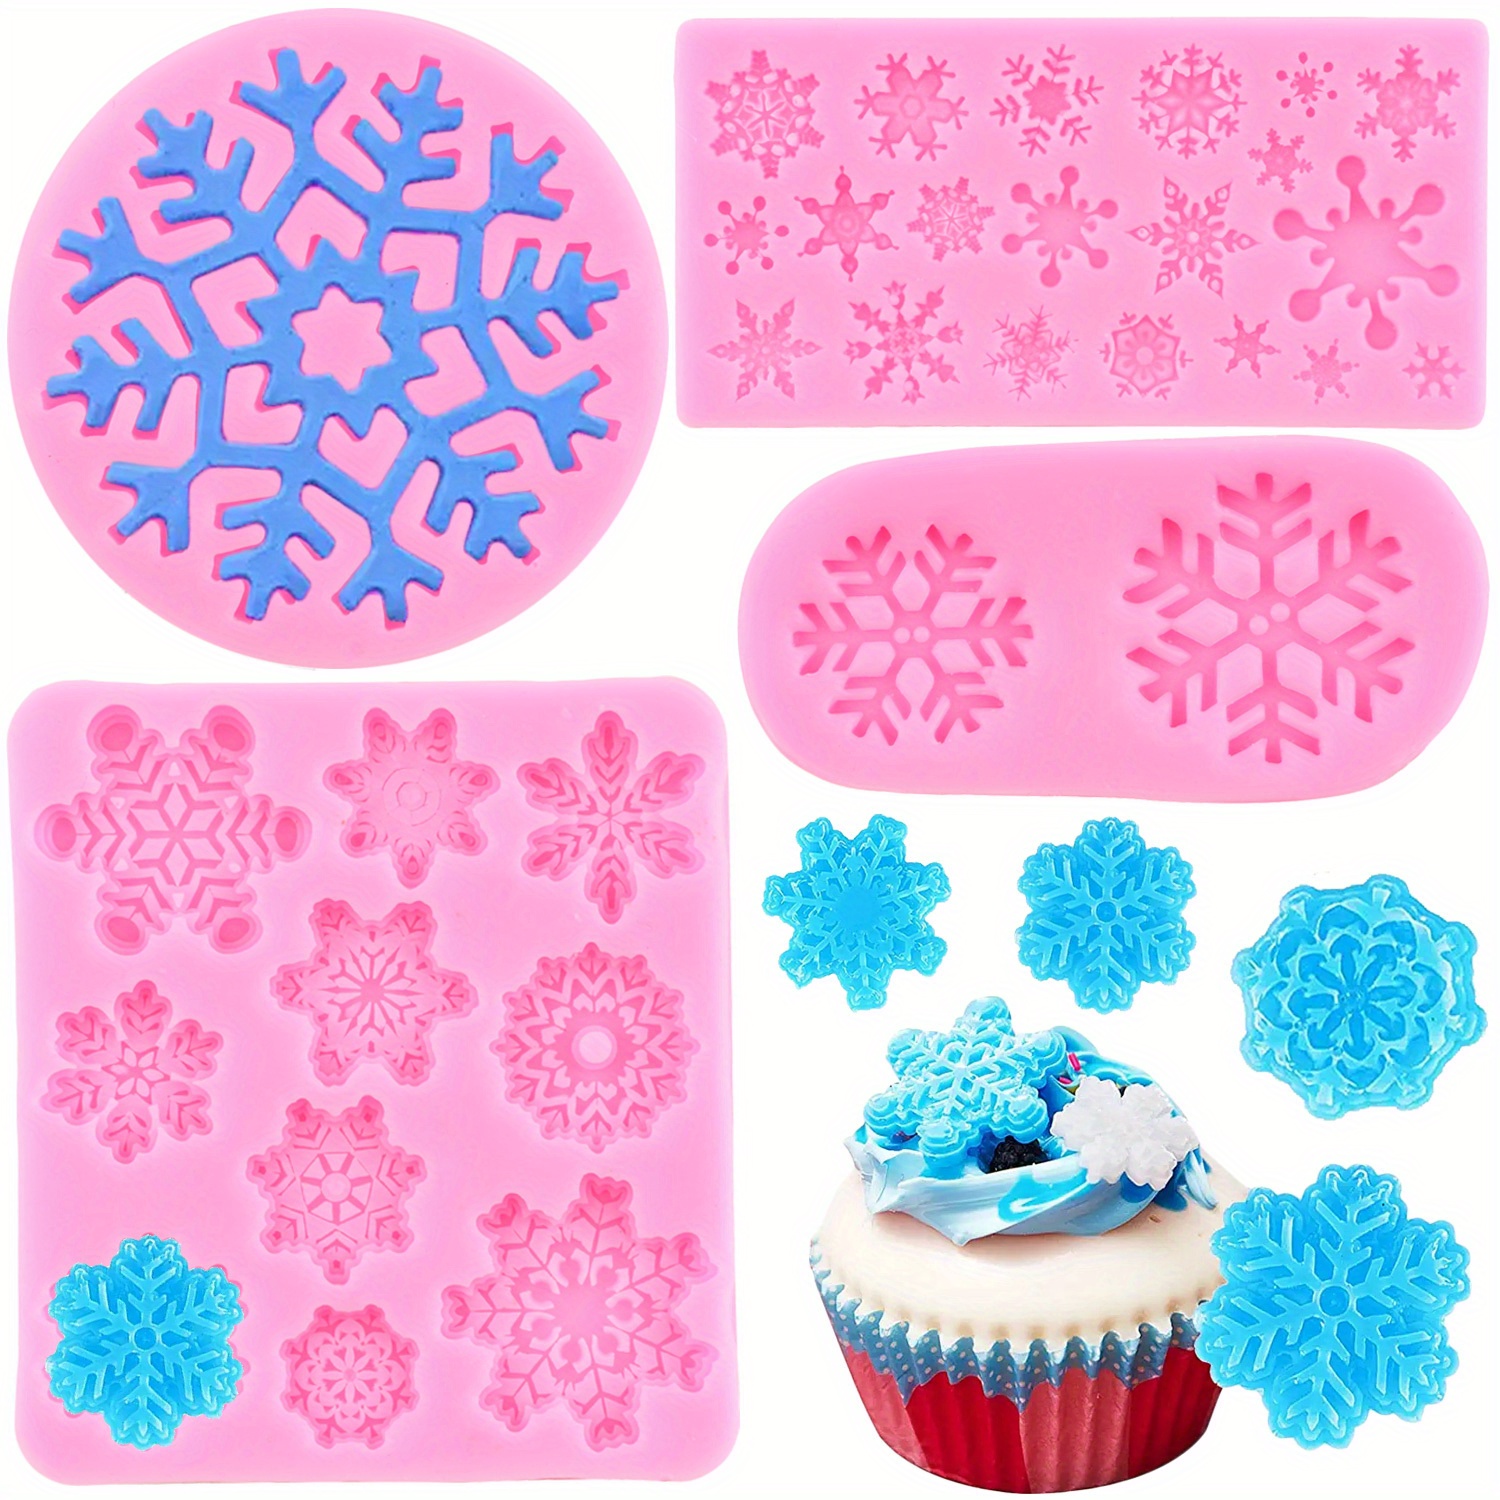 Winter Chocolate Mold, 3d Silicone Mold, Snowman Snowflake Socks Bell Shape  Candy Mold, Fondant Mold, For Diy Cake Decorating Tool, Baking Tools,  Kitchen Gadgets, Kitchen Accessories, Home Kitchen Items, For Christmas 